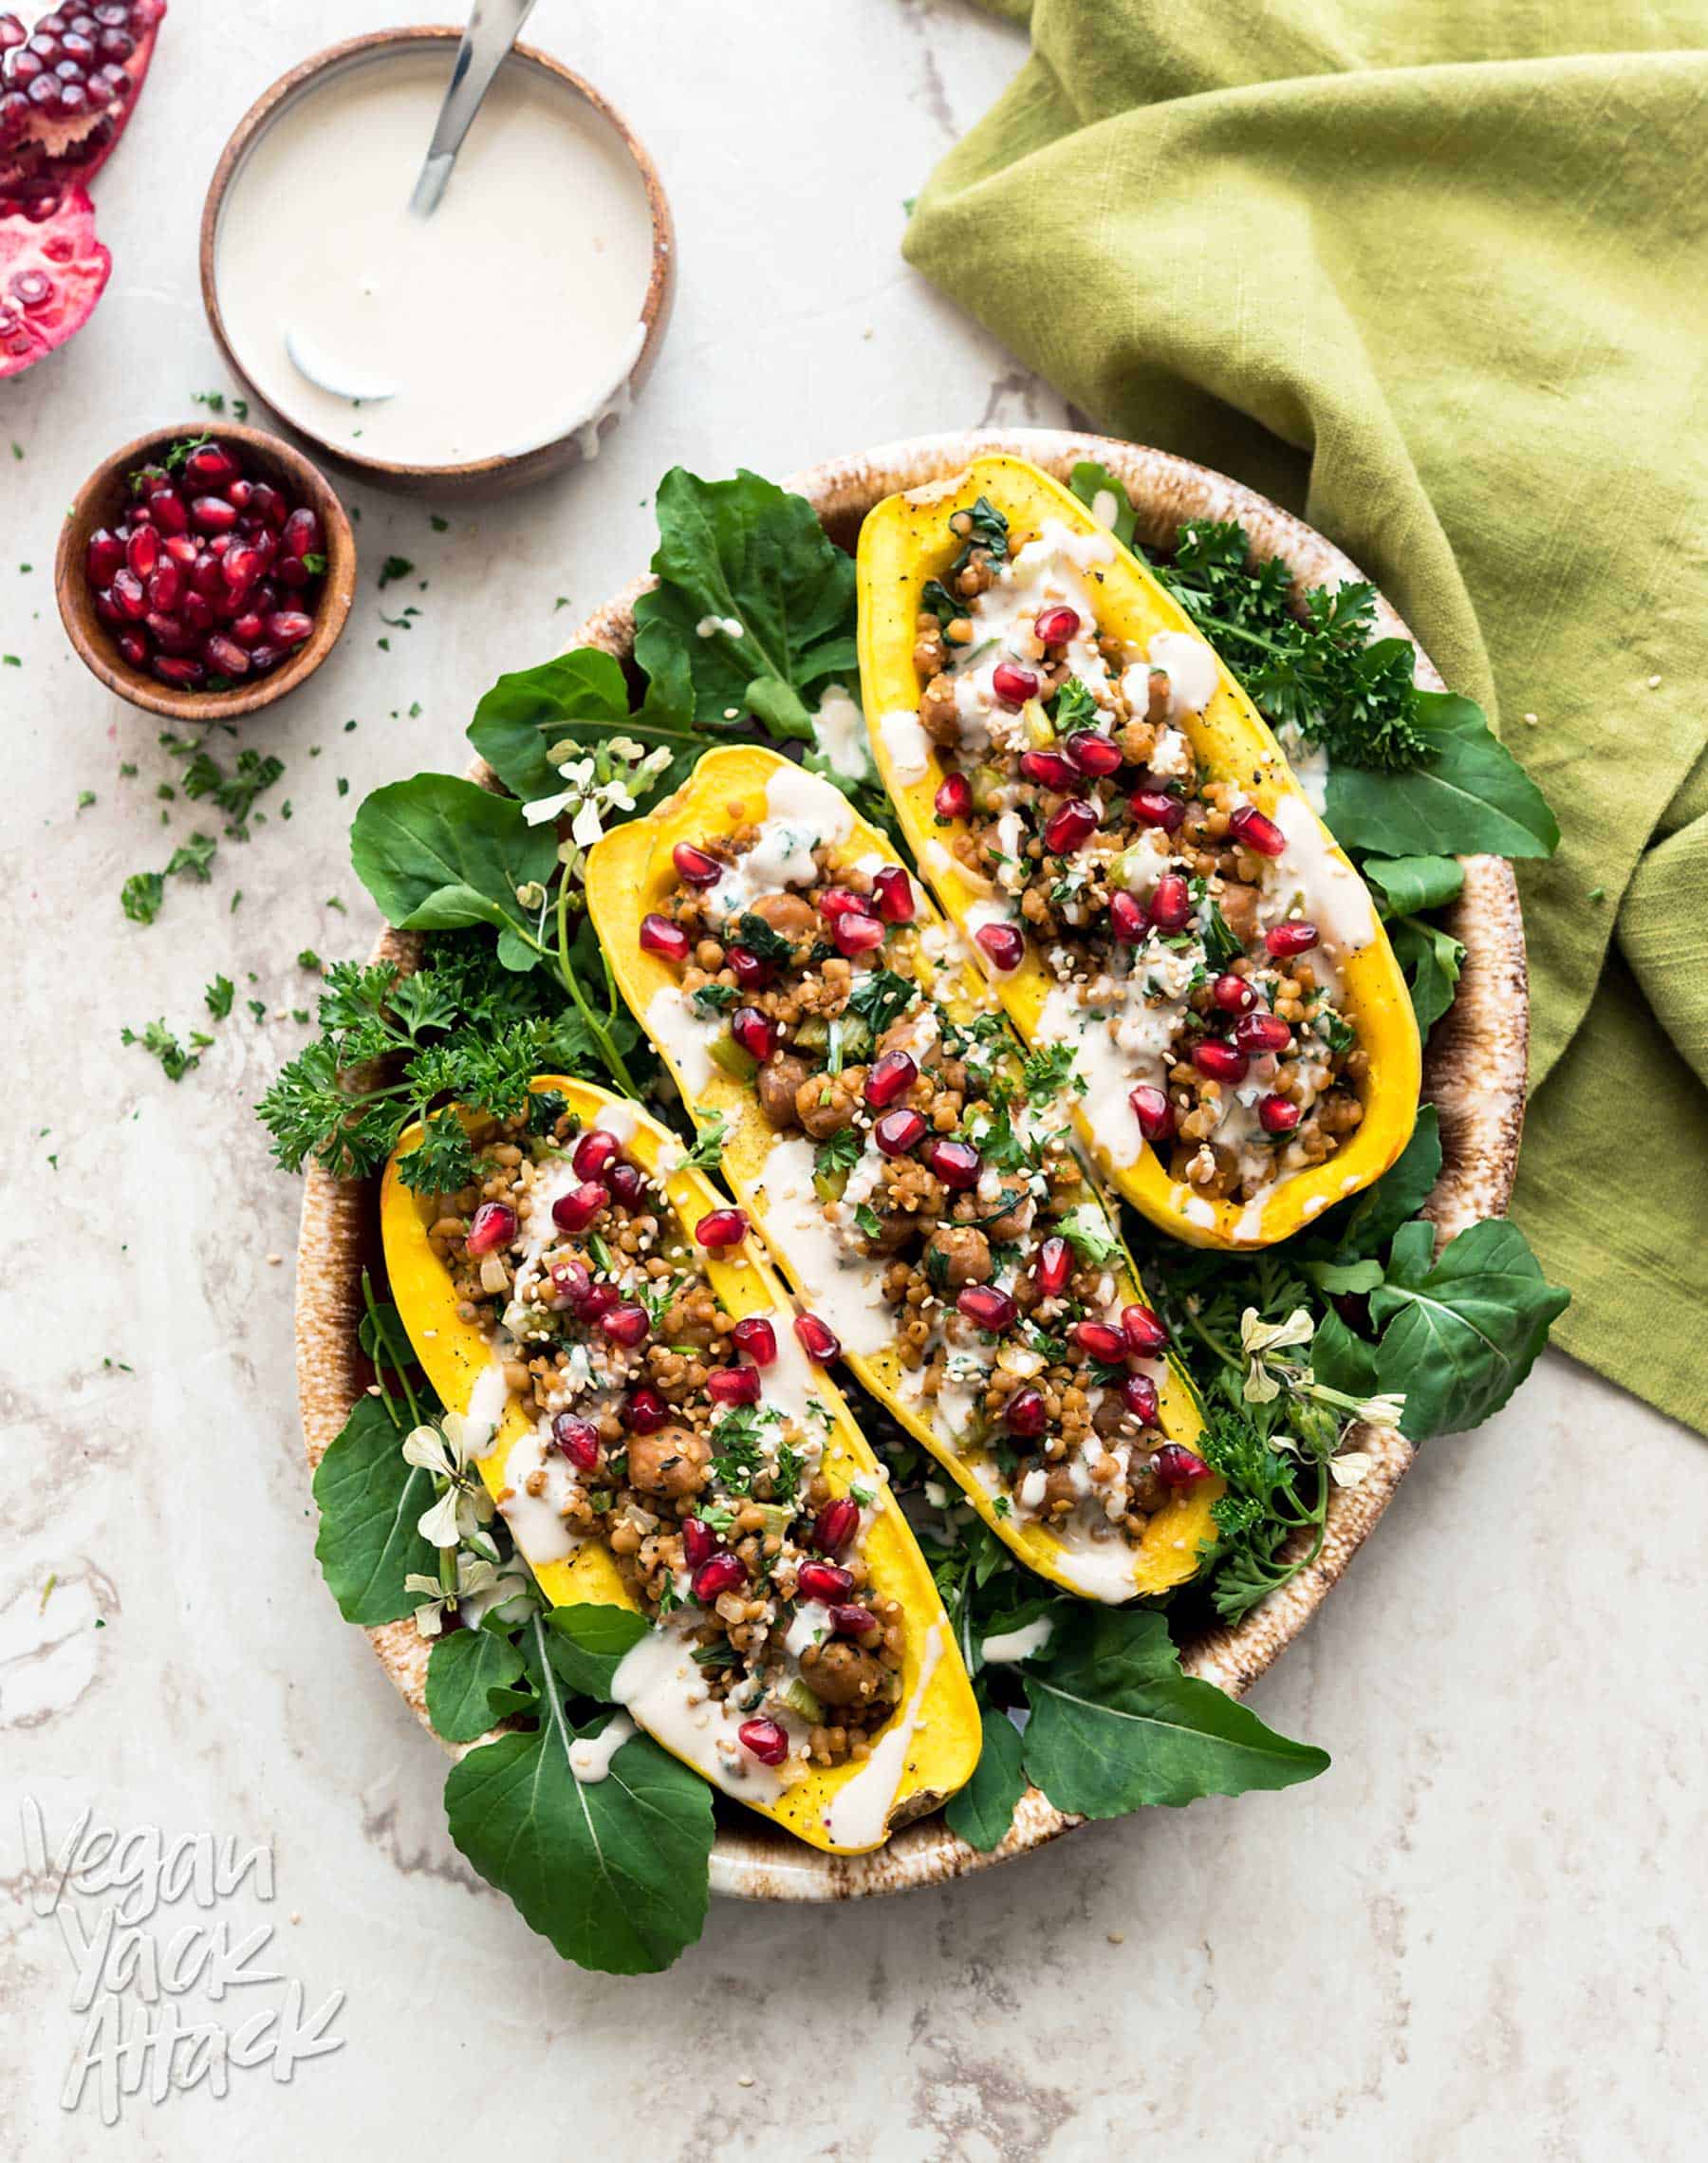 These Couscous-Stuffed Delicata Squash make for a beautiful and comforting dish, to adorn your holiday table, this year! Made with Wild Garden Pilaf. #vegan #soyfree #nutfree